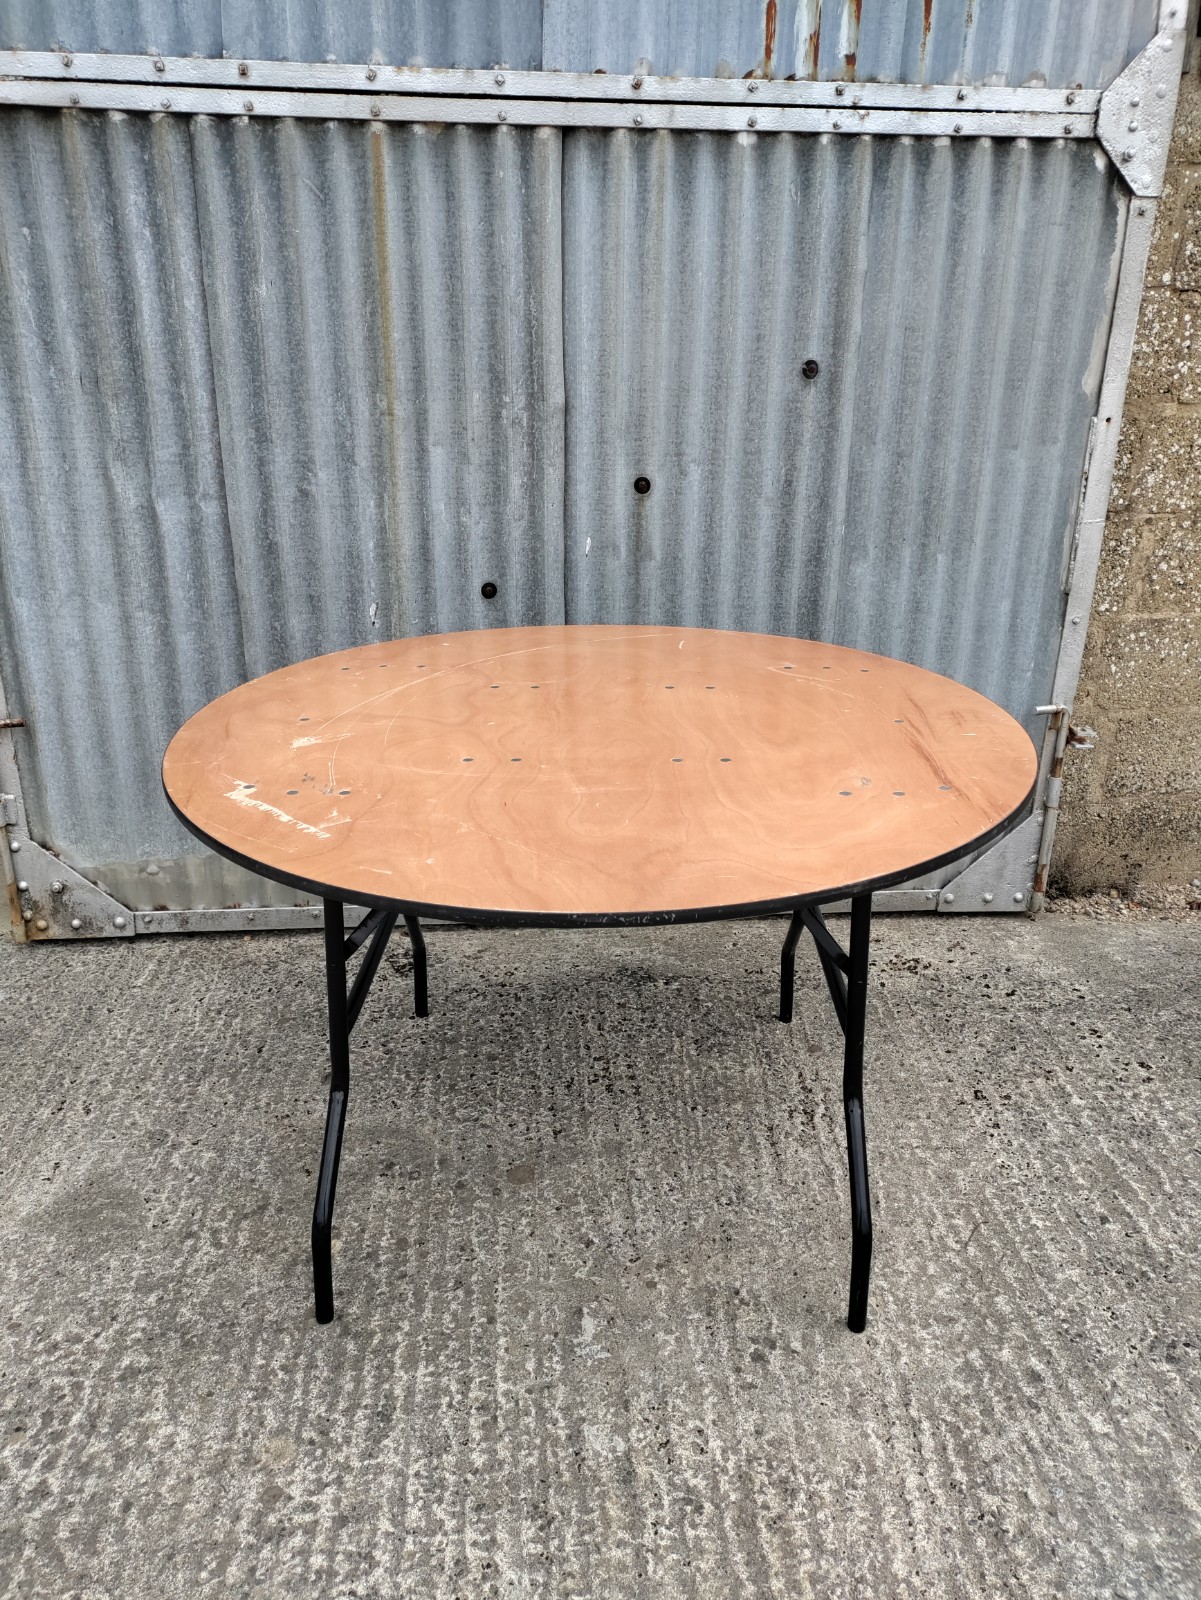 Secondhand Chairs and Tables | Round Tables with Folding Legs | 4x 3ft  Round Banqueting Tables - Gloucestershire